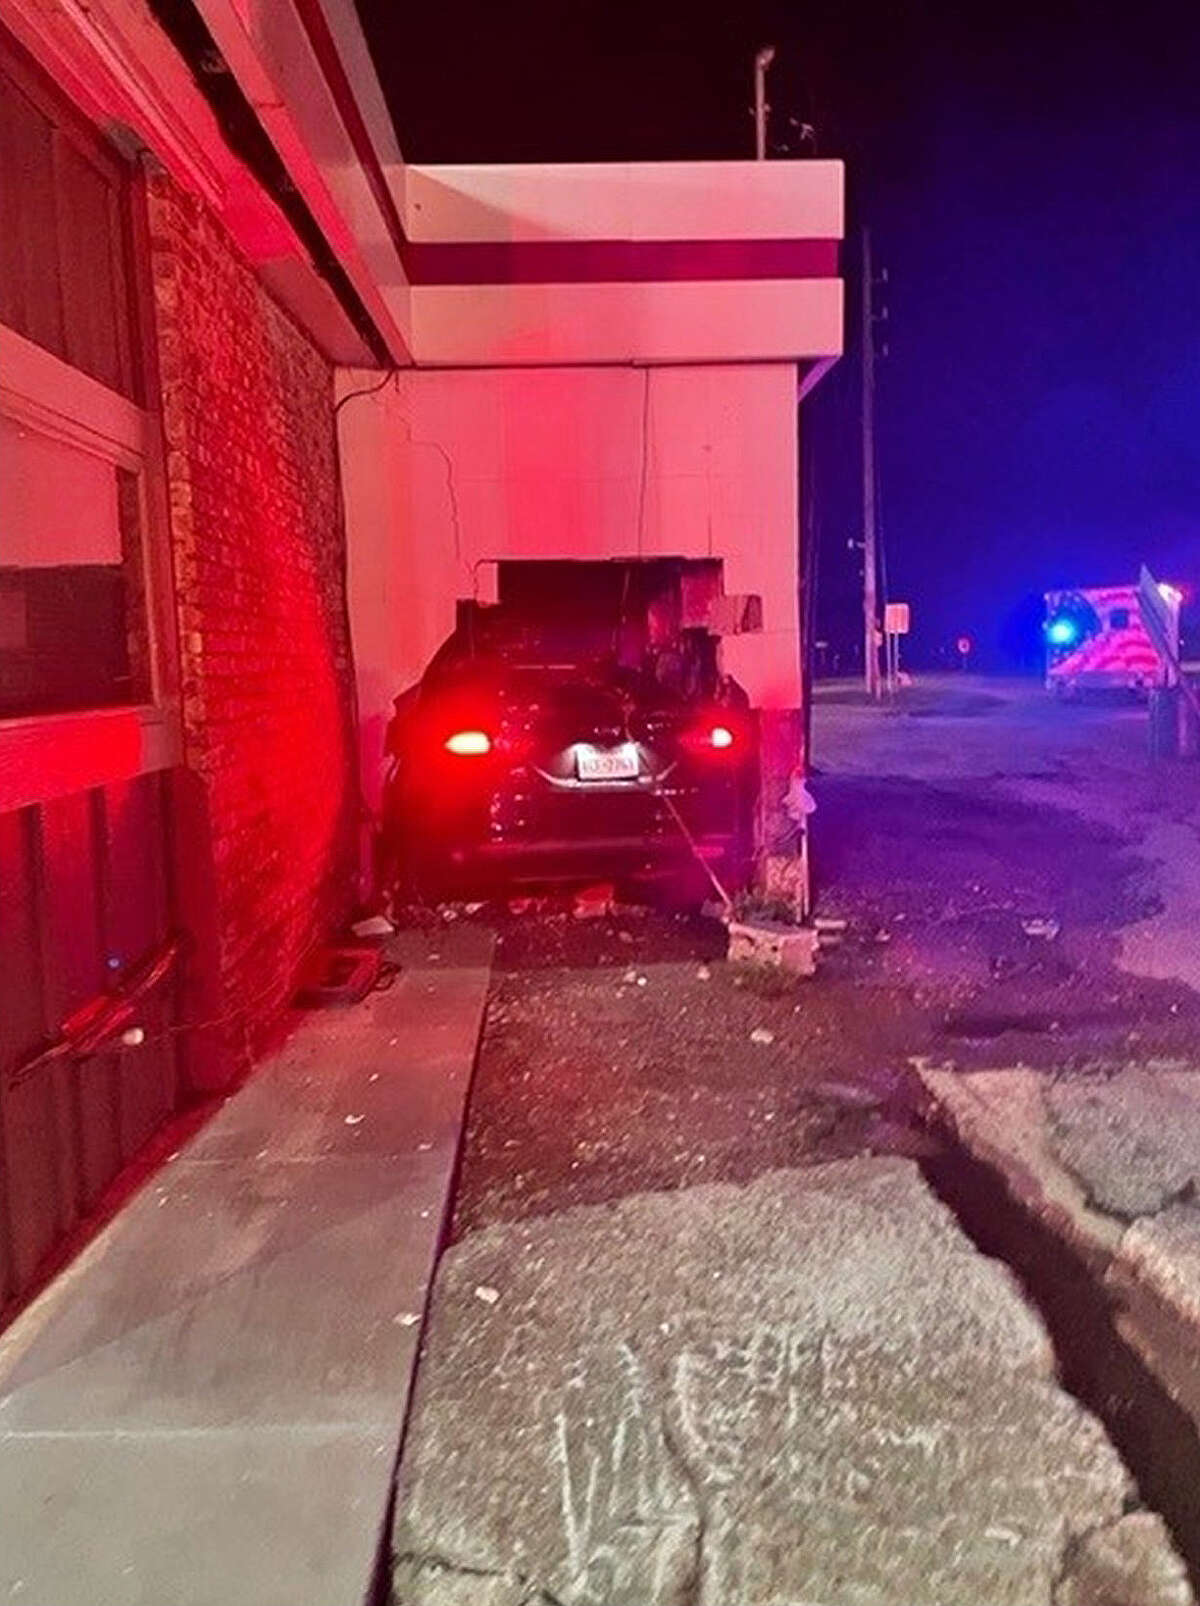 In an accident a few weeks earlier, a vehicle jumped the curb and flew into the back end of Talbott's station on FM 2100 in Crosby. The damage to the inside of the repair shop was extensive including destroying tool boxes and more.